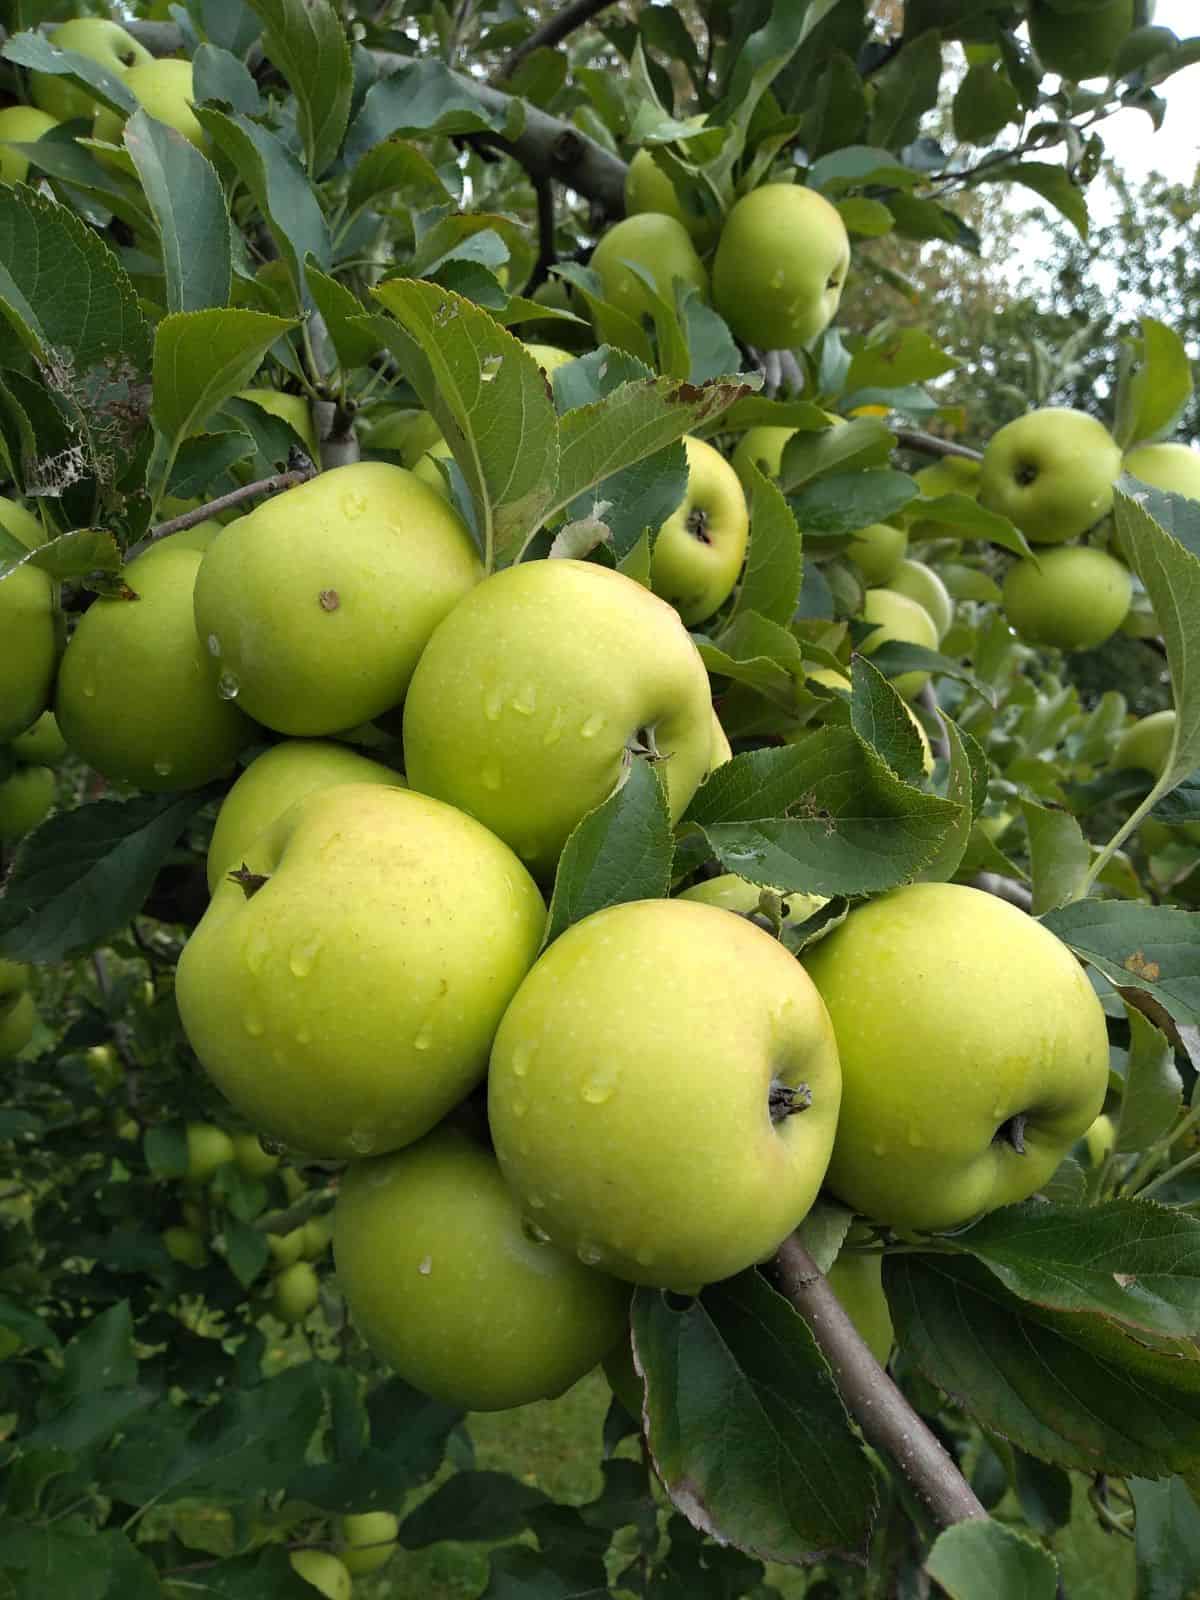 Grimes Golden apples in a tree with water droplets on them.